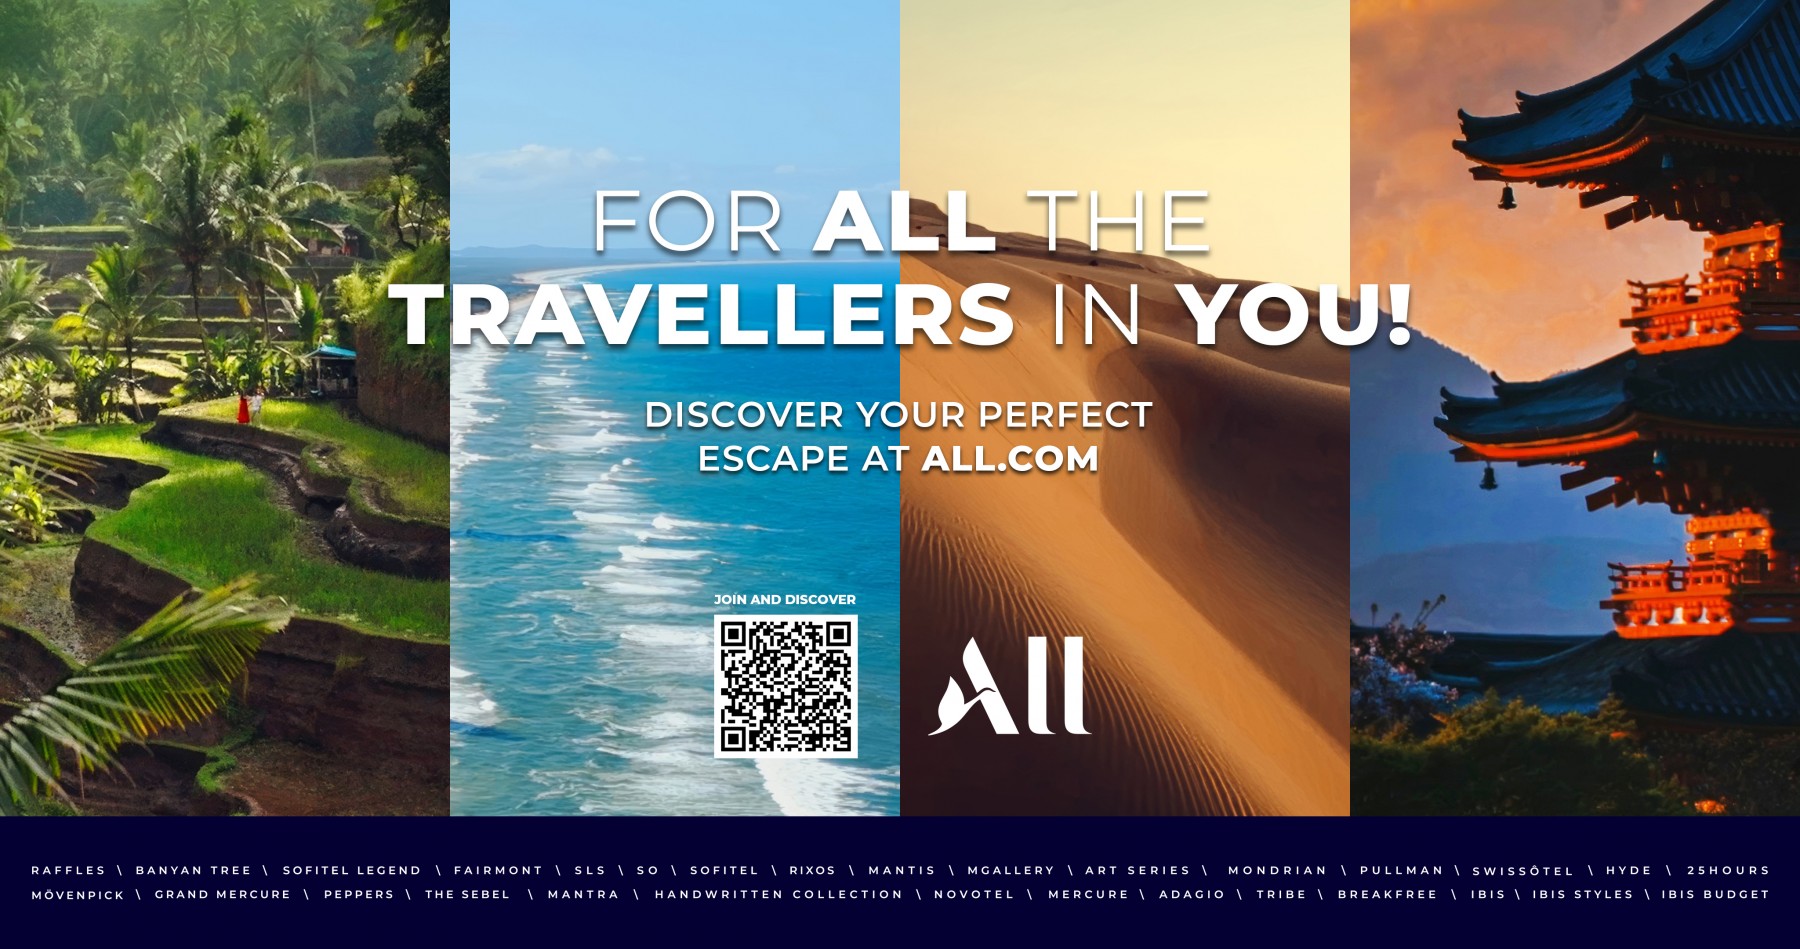 Accor launches “For ALL the travellers in You' campaign - Novotel Danang Premier Han River 